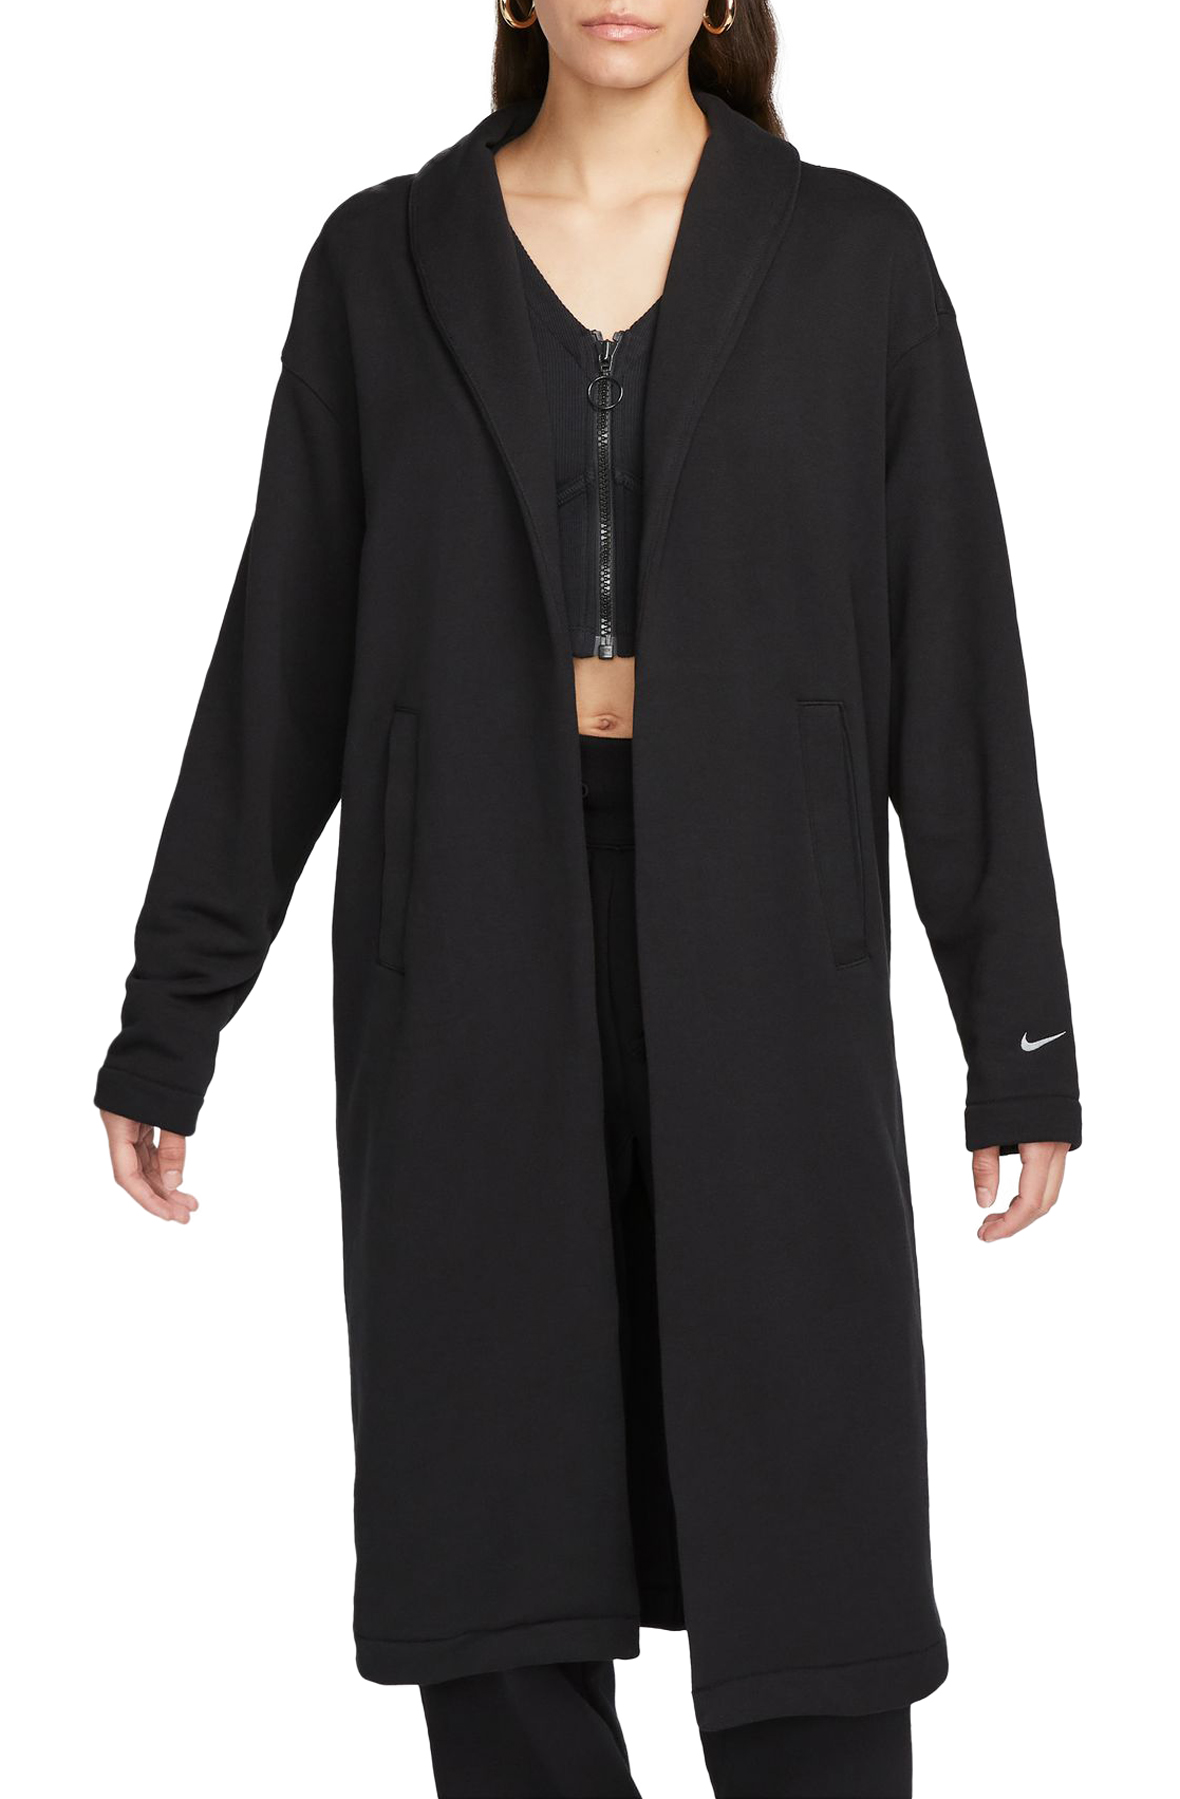 NIKE Oversized French Terry Duster FB8749 010 - Shiekh